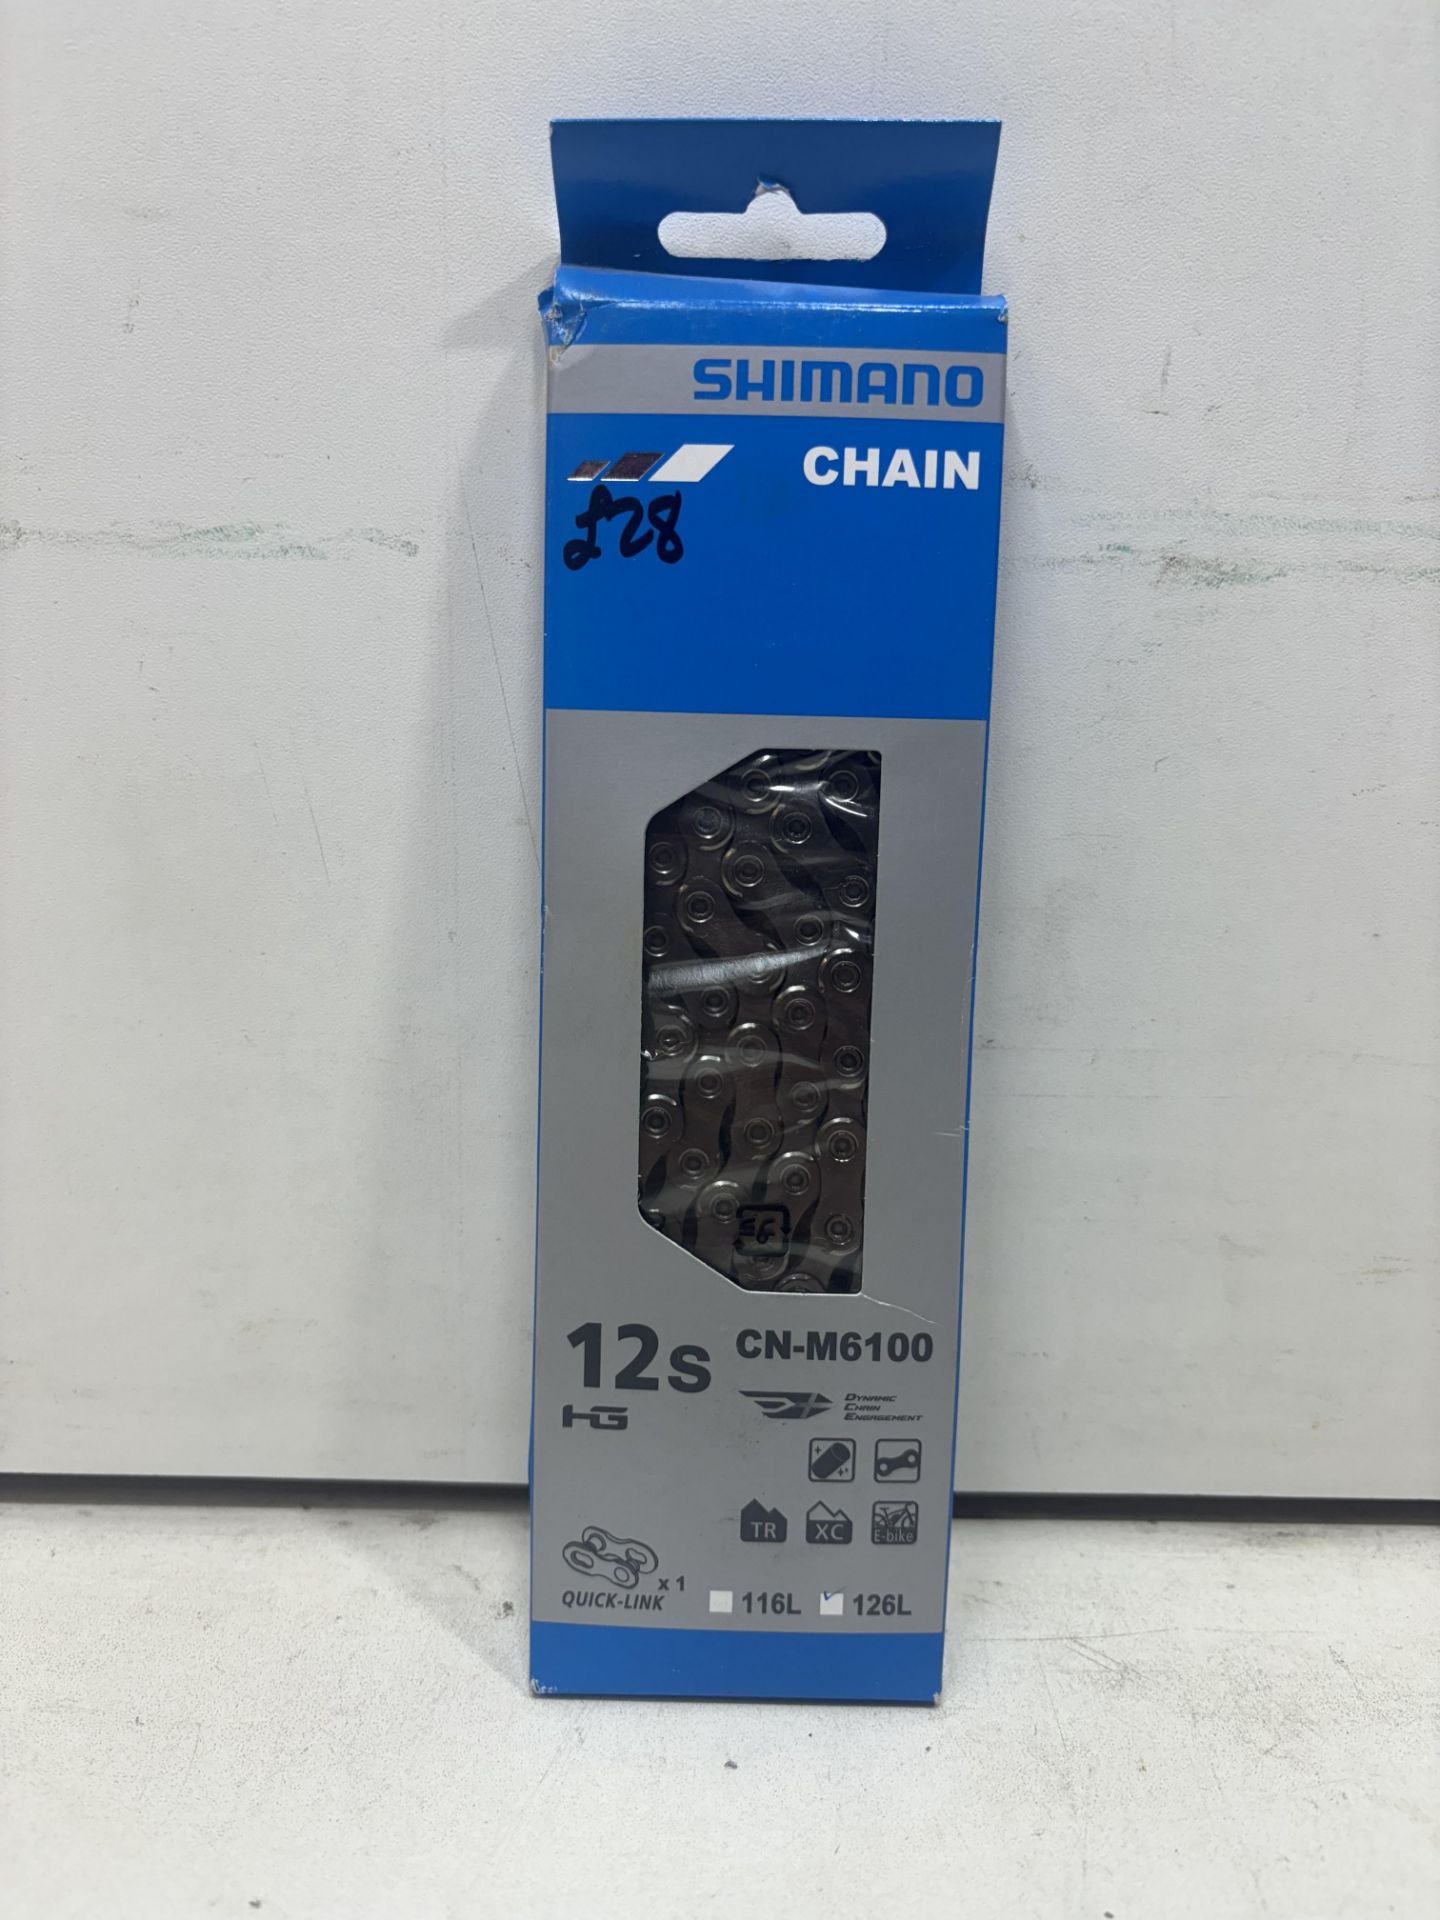 4 x shimano Deore CN-M6100 Chains - 12-Speed, 126 Links - Image 3 of 4